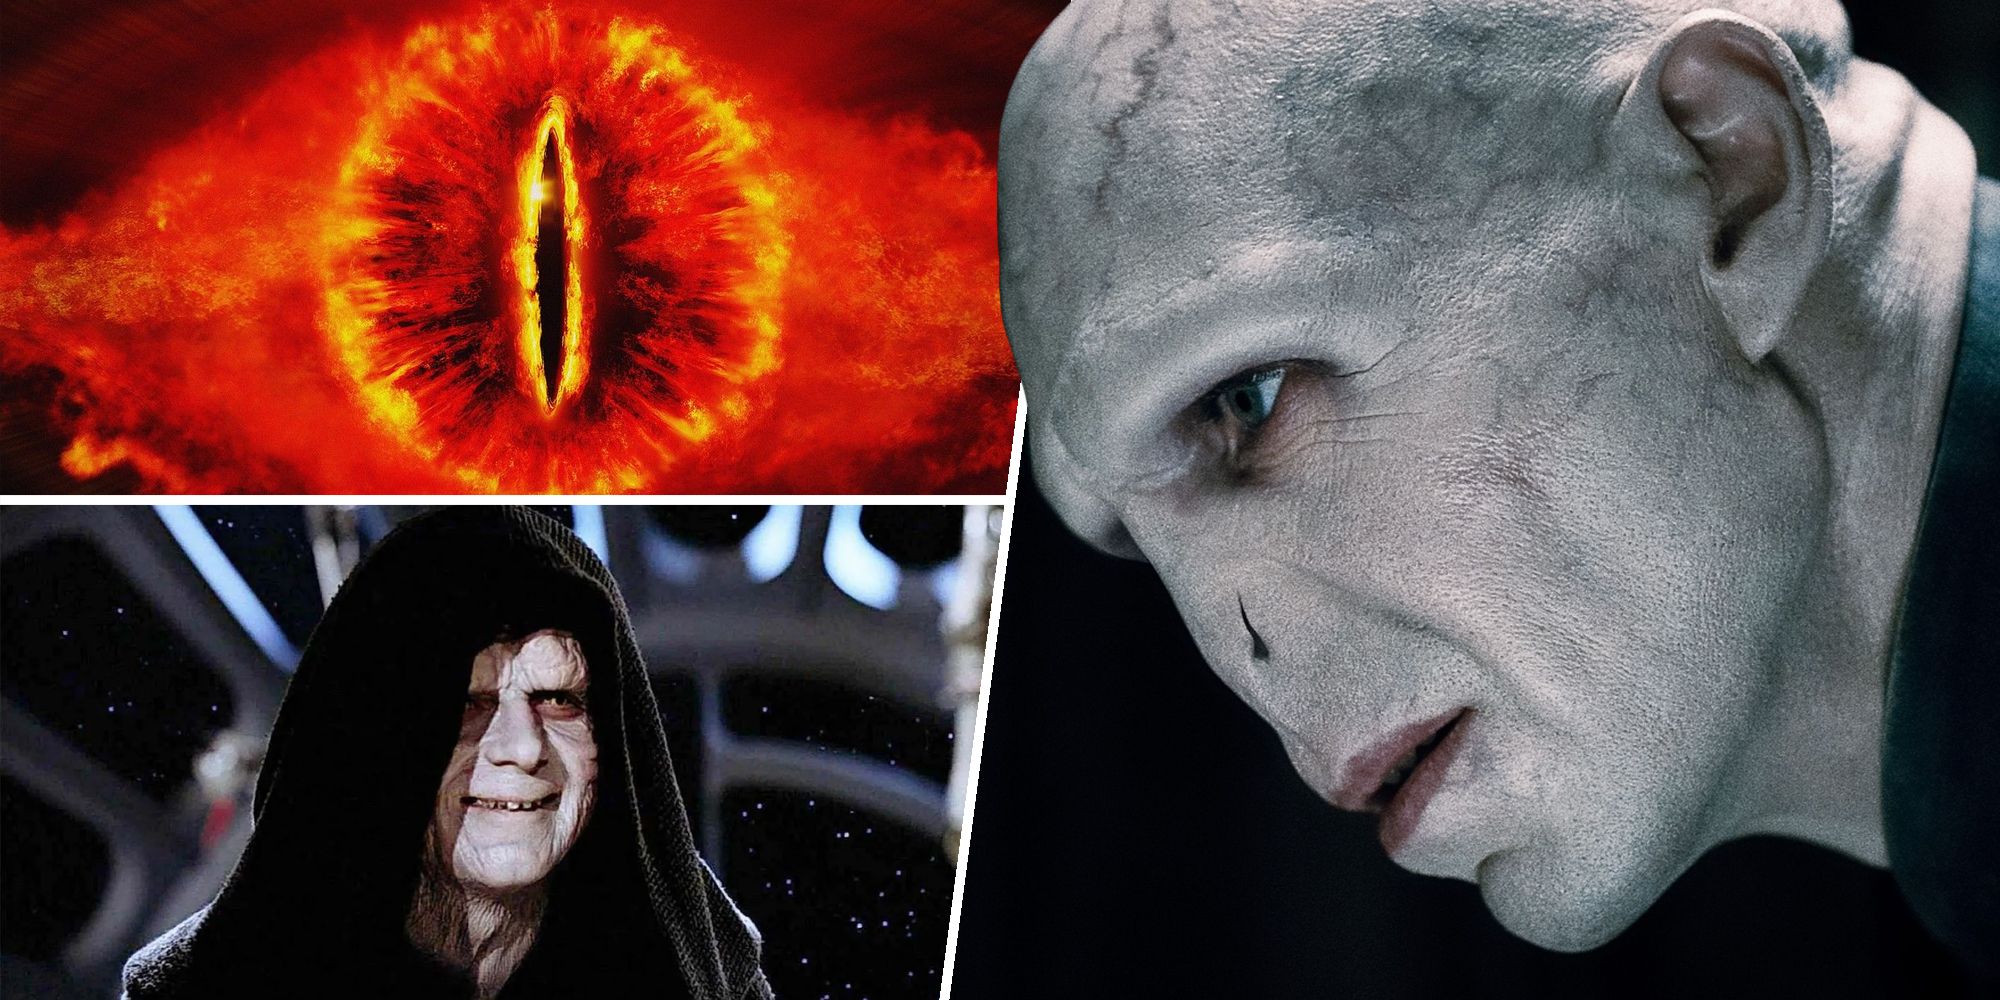 Sauron (The Lord of the Rings), Emperor Palpatine (Star Wars), and Lord Voldemort (Harry Potter)